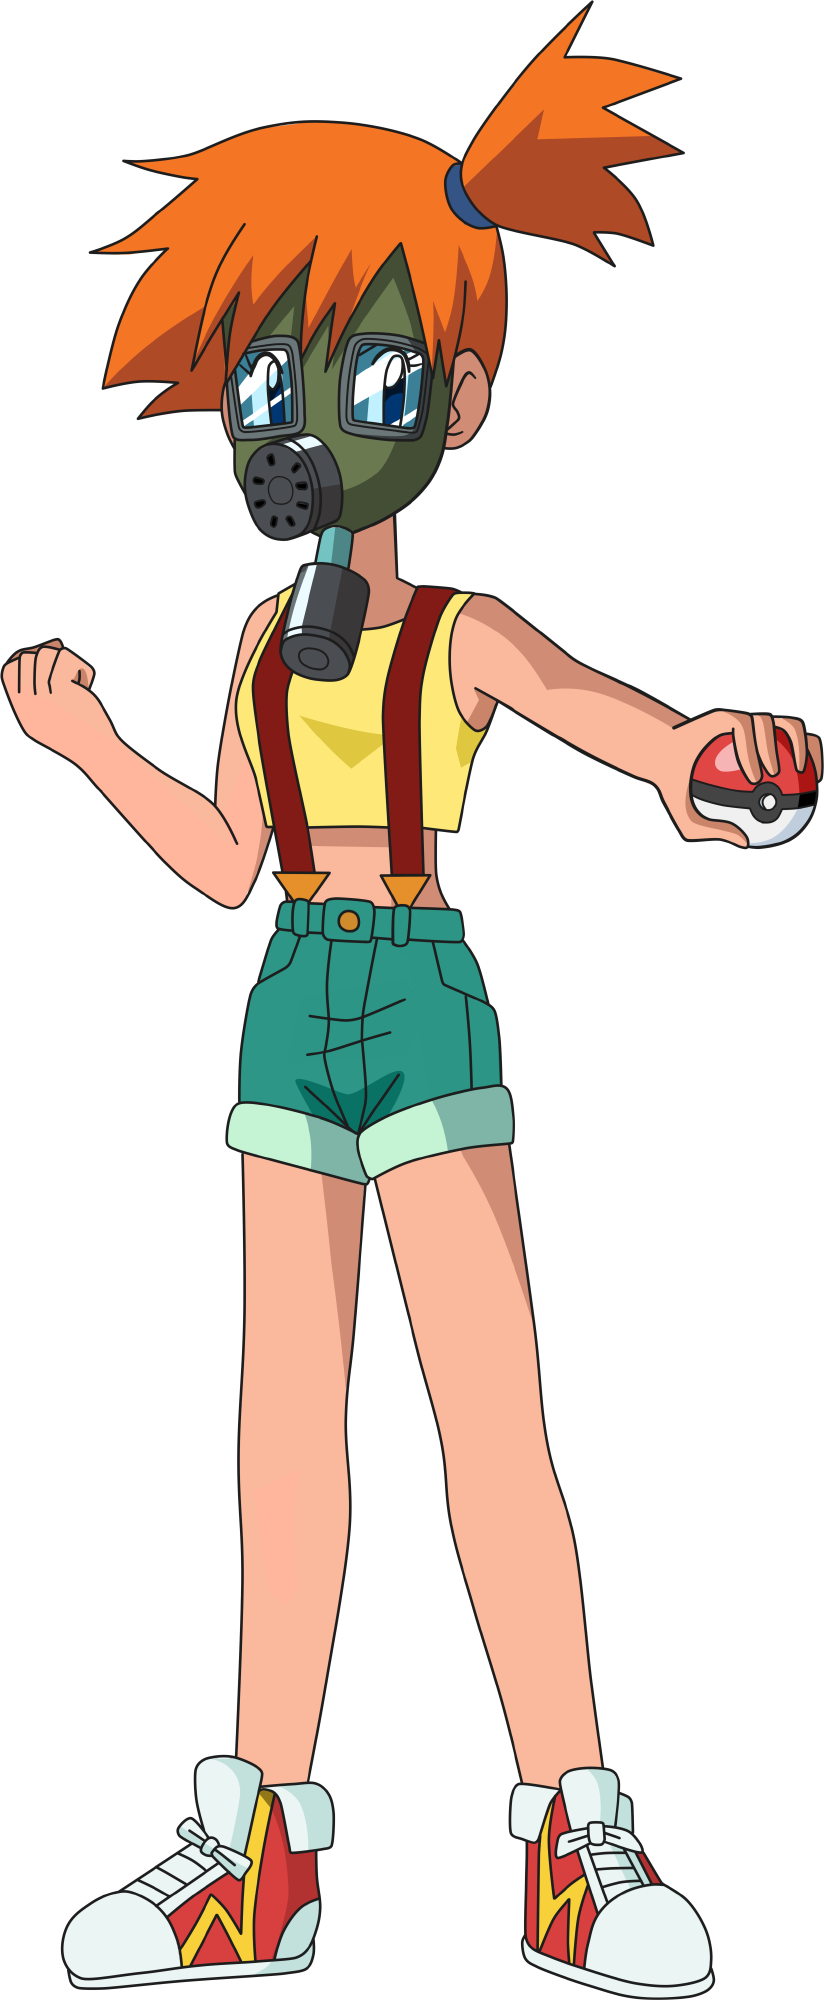 Pokemon clipart misty. Image in her gas